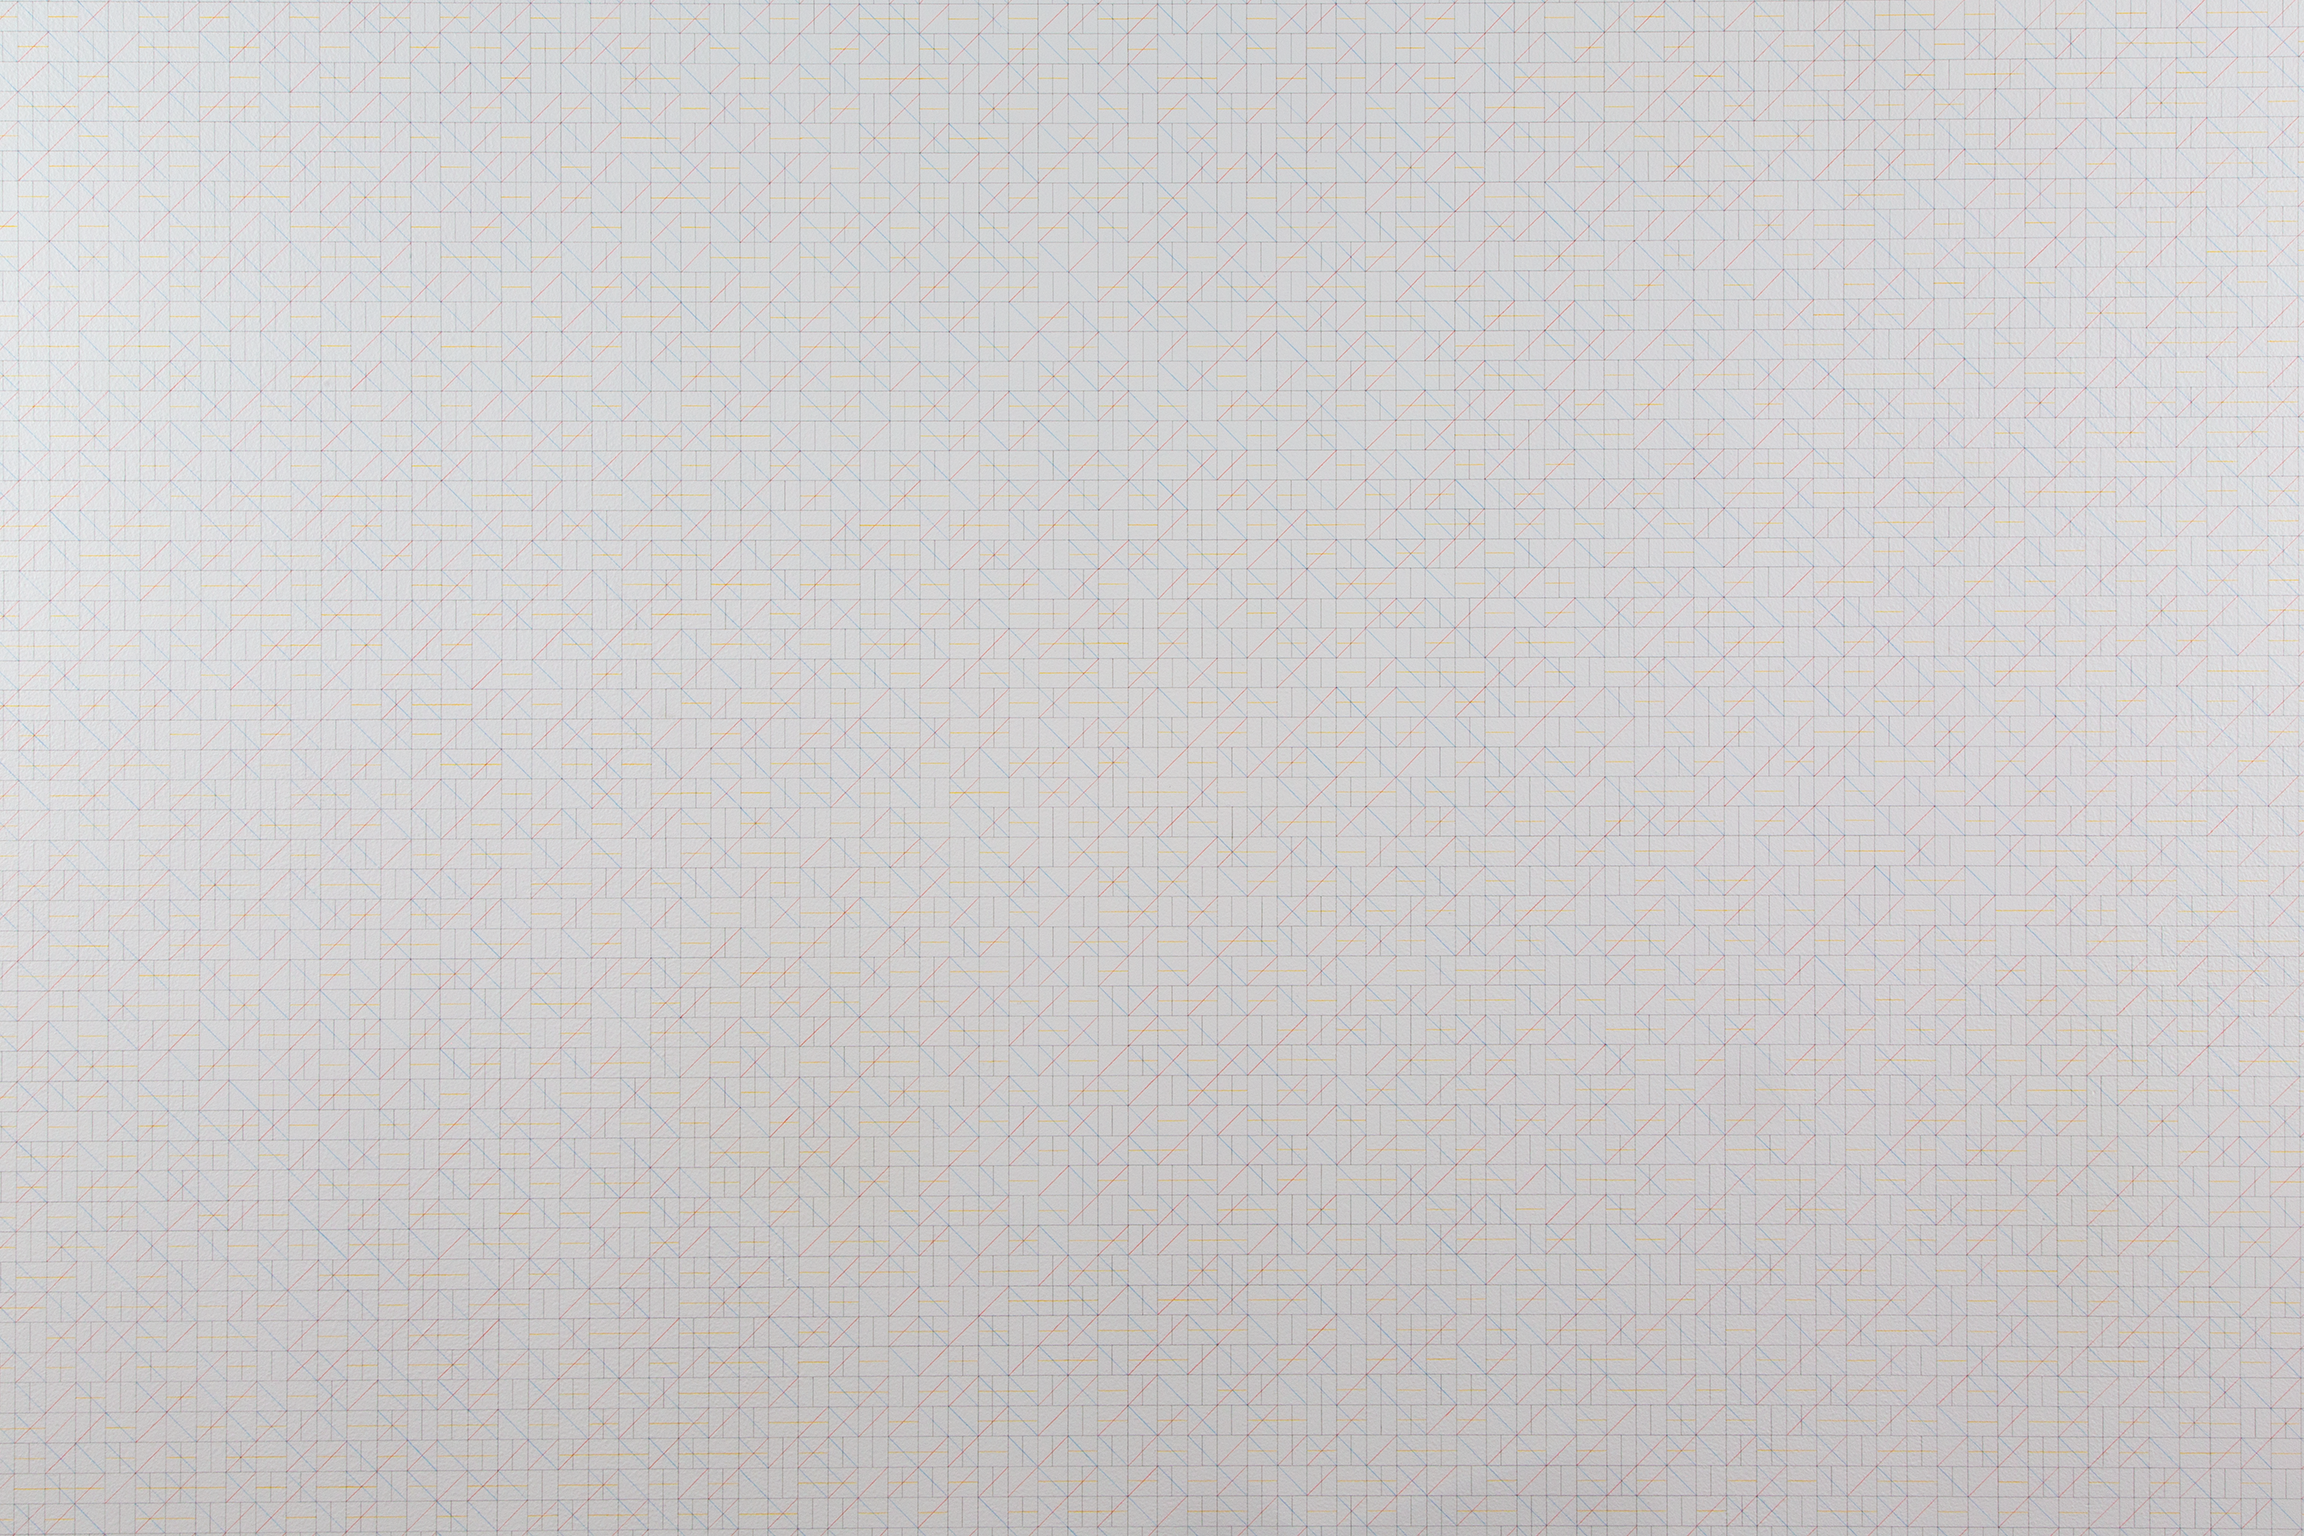 A grid with red, blue, and yellow lines on a white background.